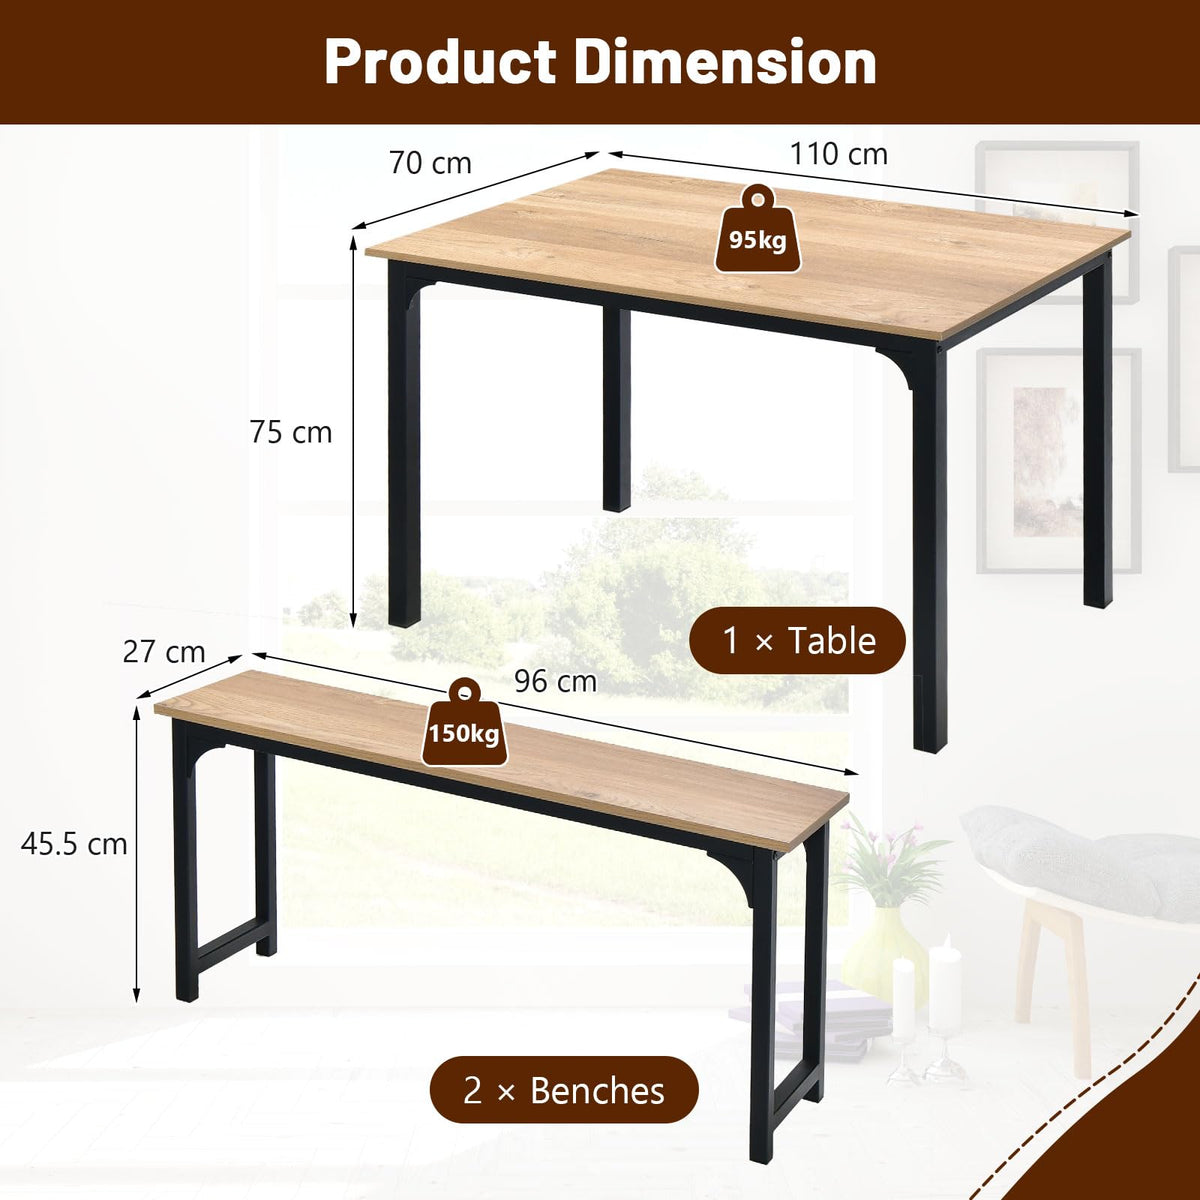 Giantex Dining Table Set for 4, 3 PCS Farmhouse Kitchen & Dining Room Furniture Kit with 2 Benches